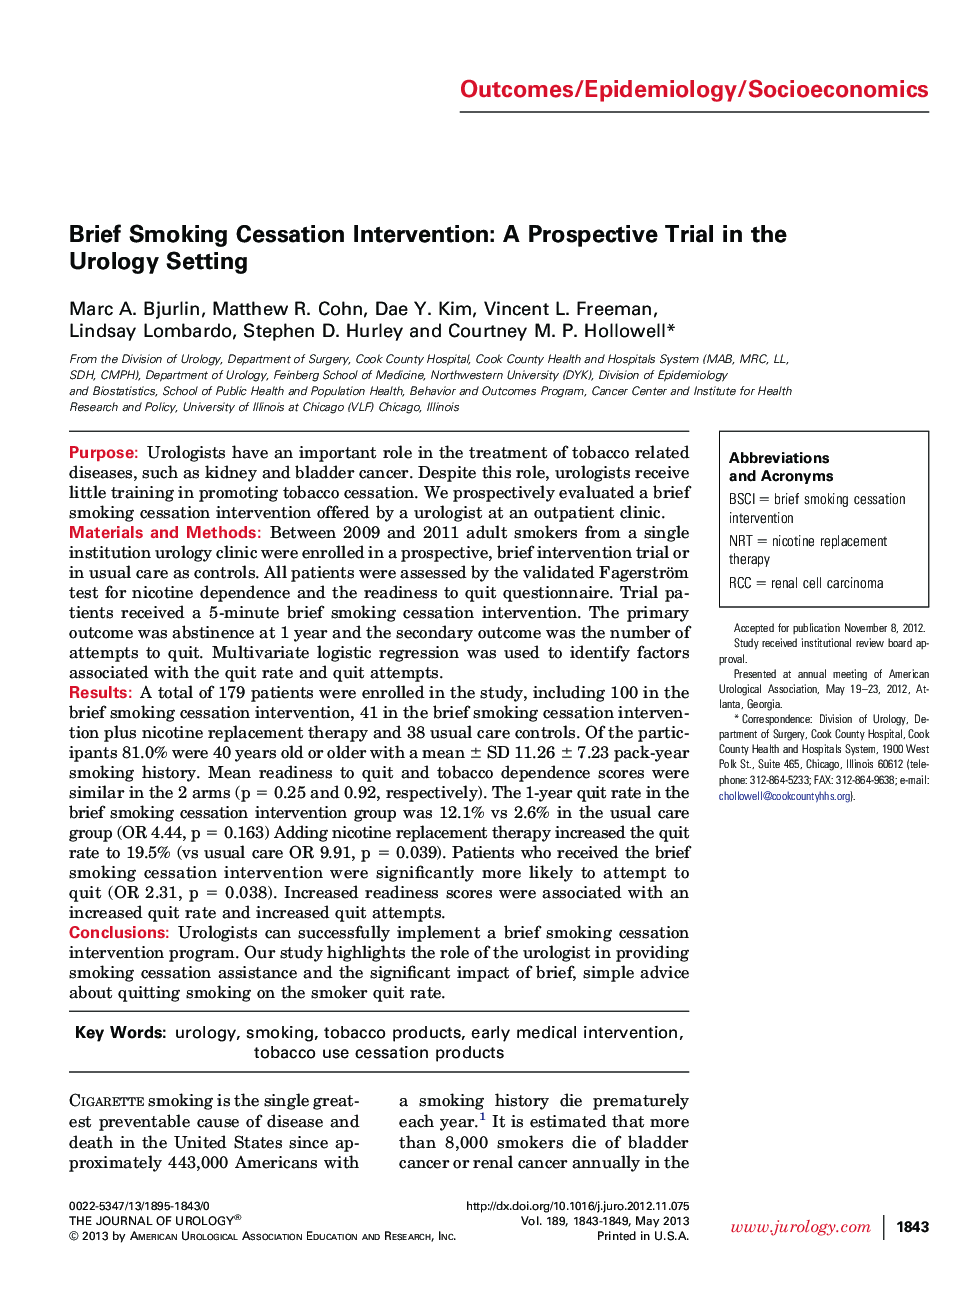 Brief Smoking Cessation Intervention: A Prospective Trial in the Urology Setting